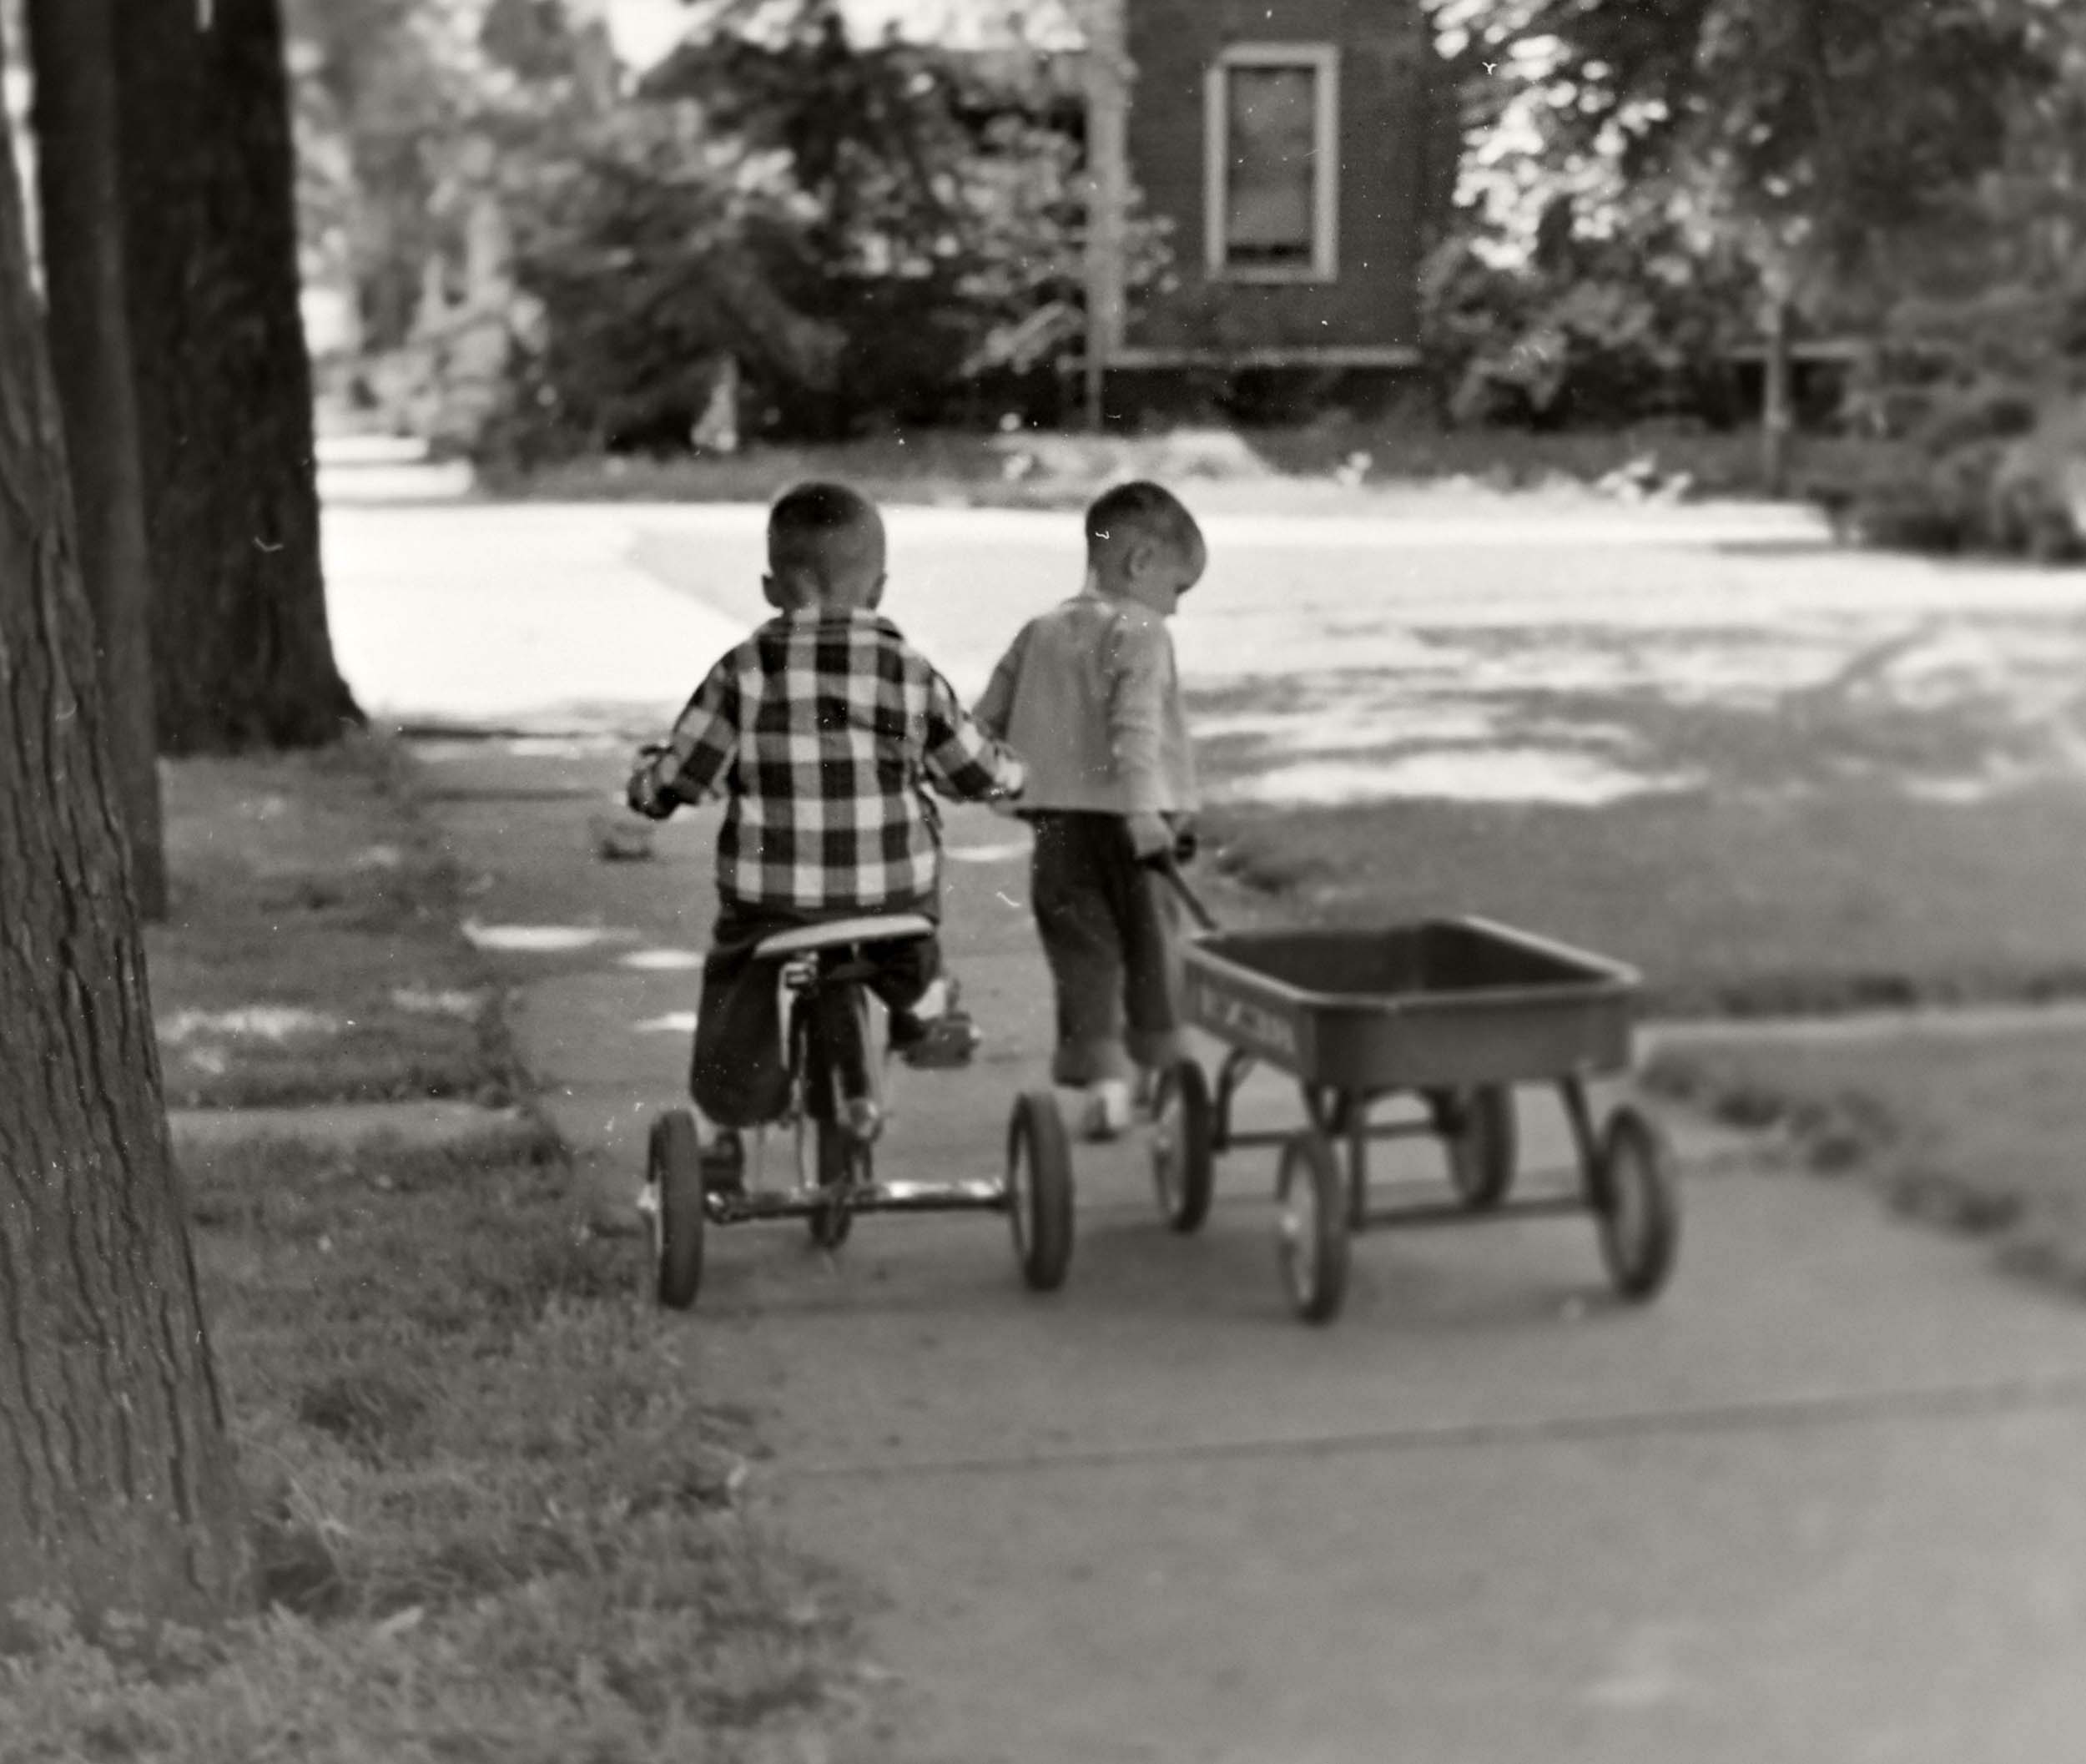 Ellet, Ohio, outside of Akron. My brother and his friend. View full size.